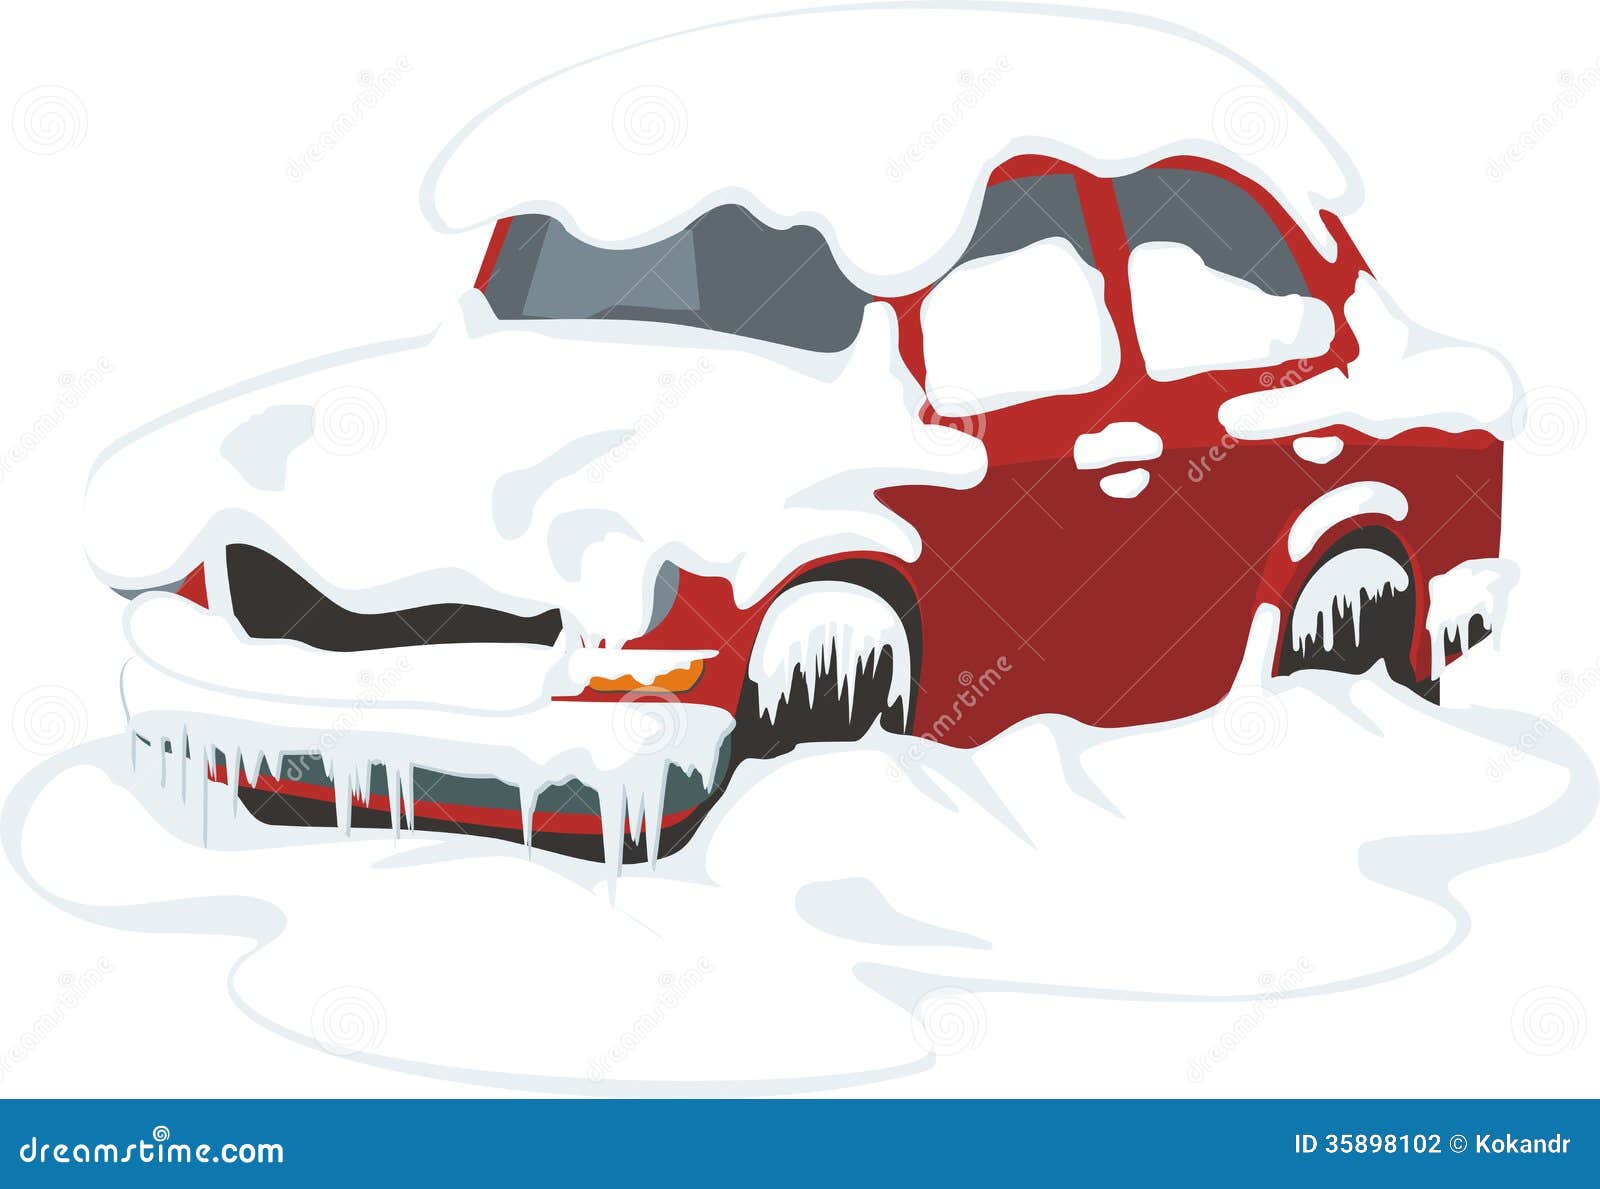 clipart car stuck in snow - photo #9